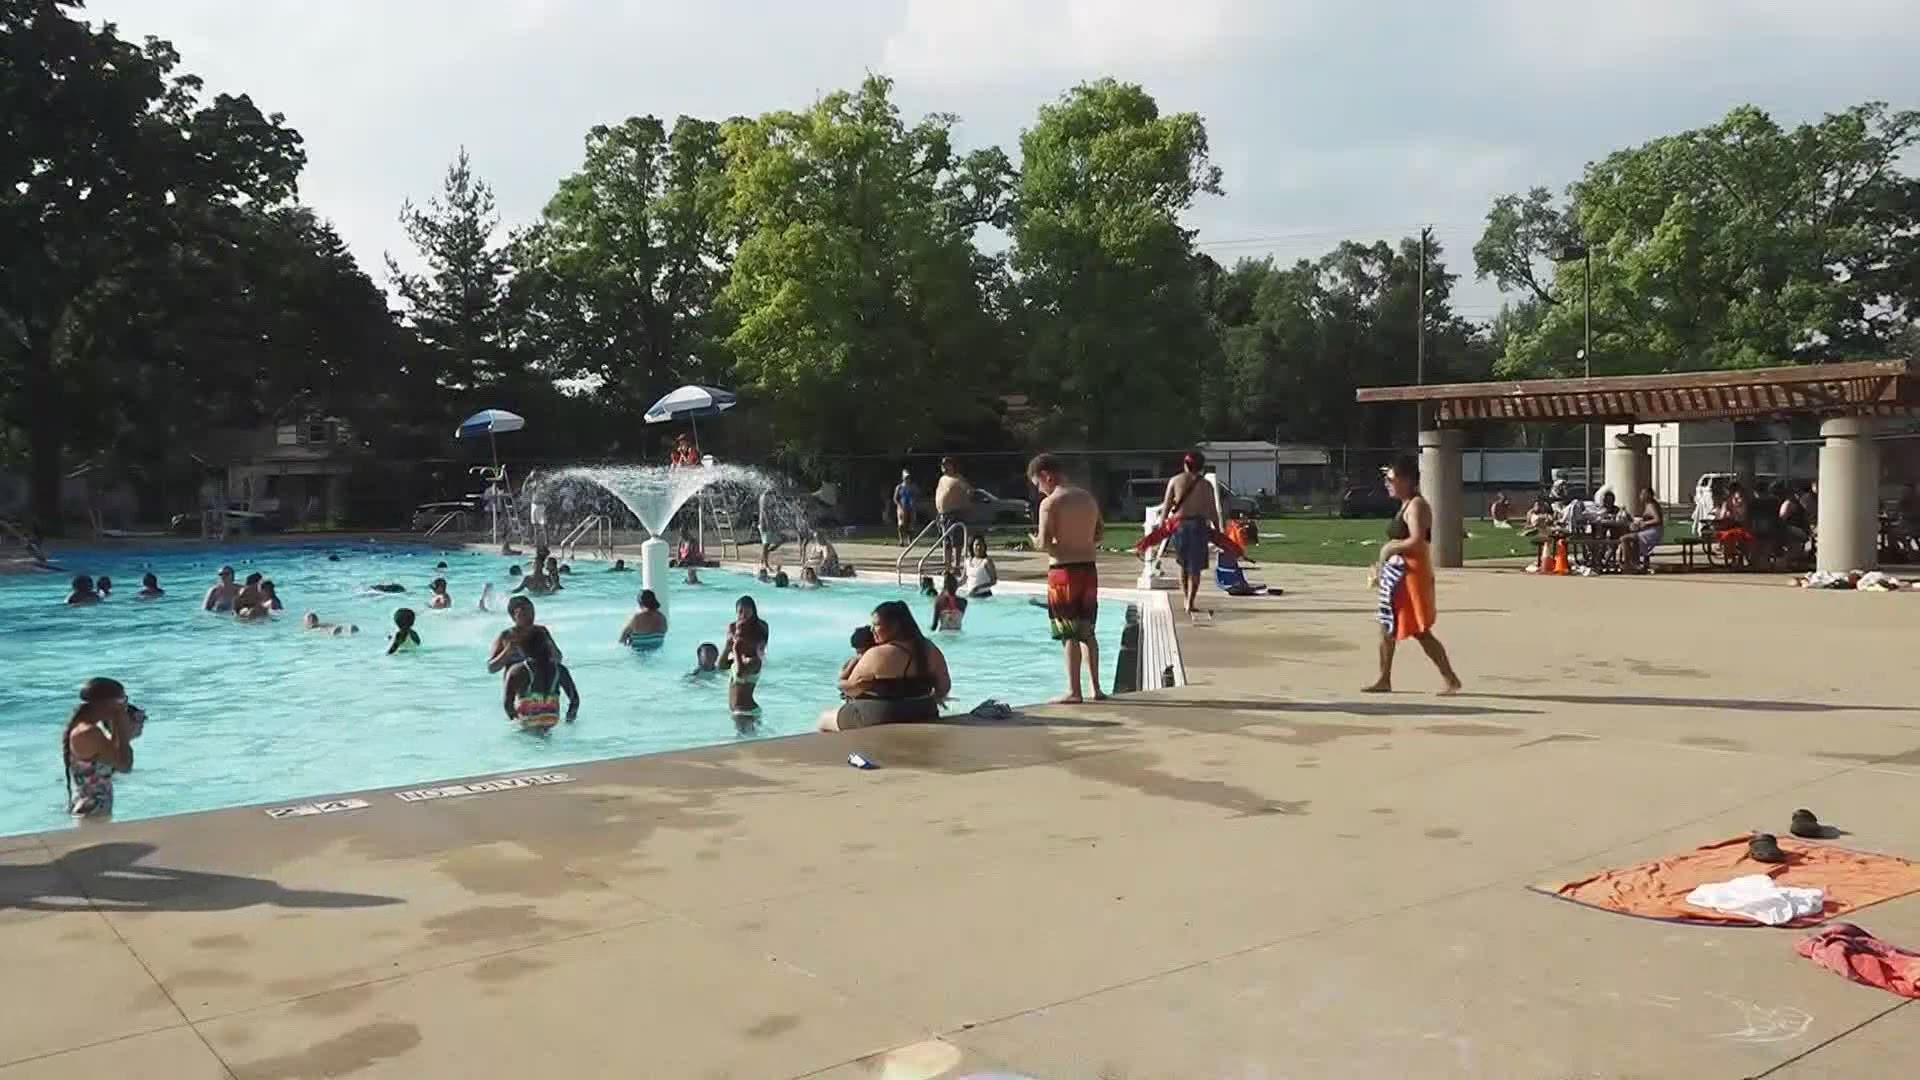 Grand Rapids pools have been open for about a month now, after the pandemic closed them for the summer season in 2020.